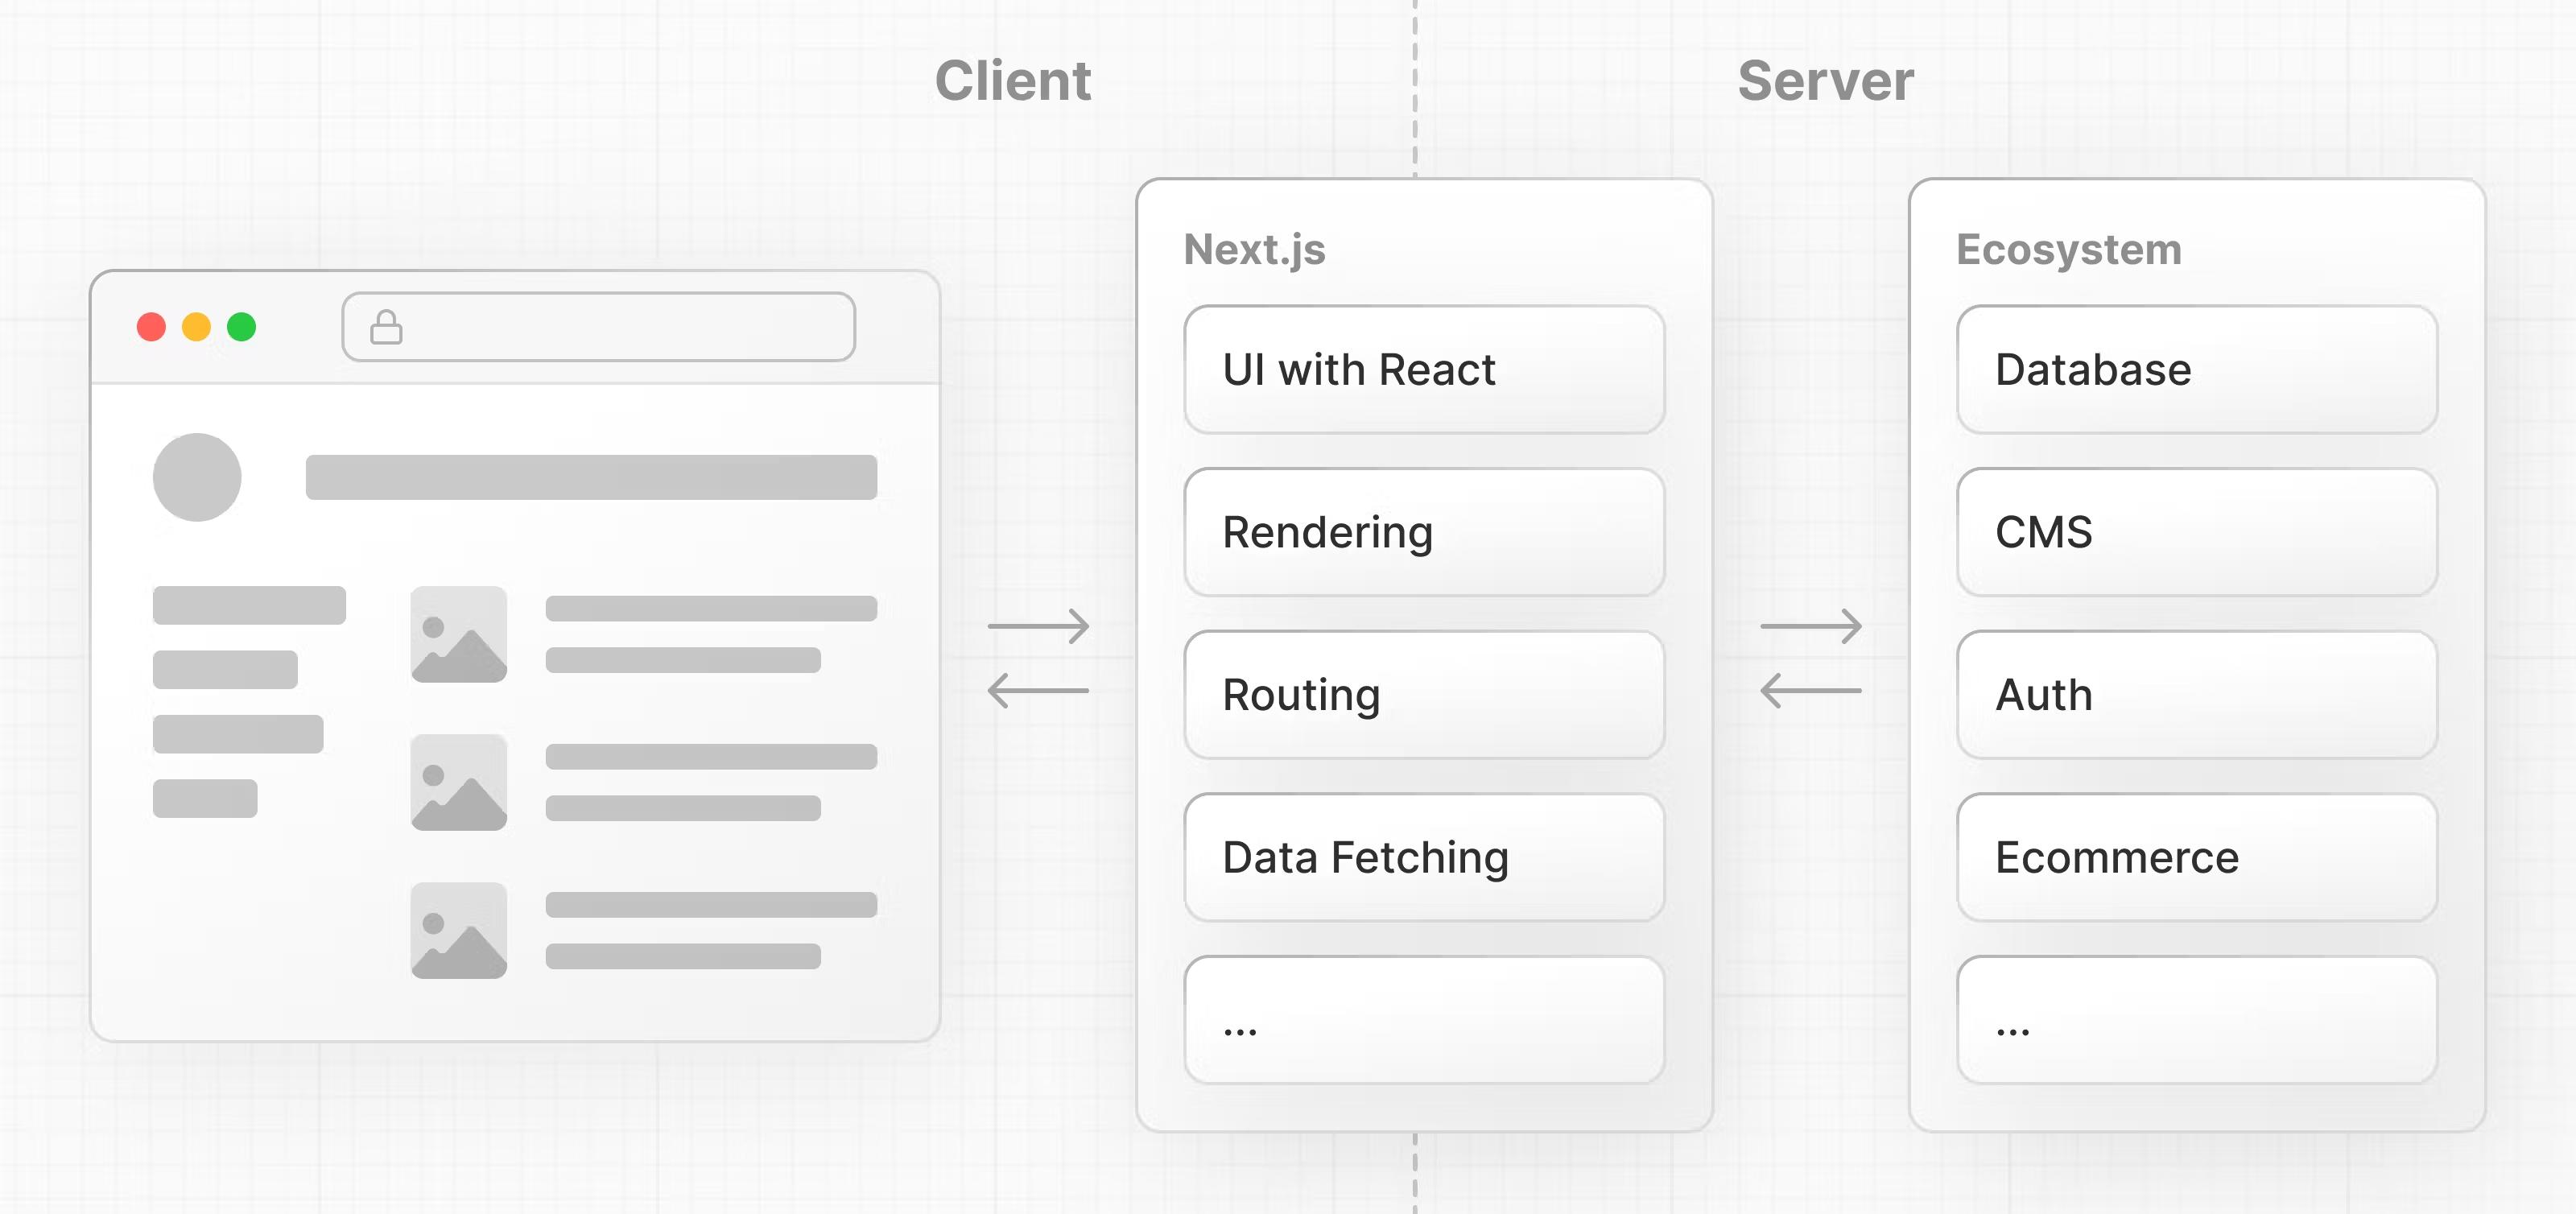 Diagram showing how Next.js spans the server and client, and provides additional features. Source: https://nextjs.org/